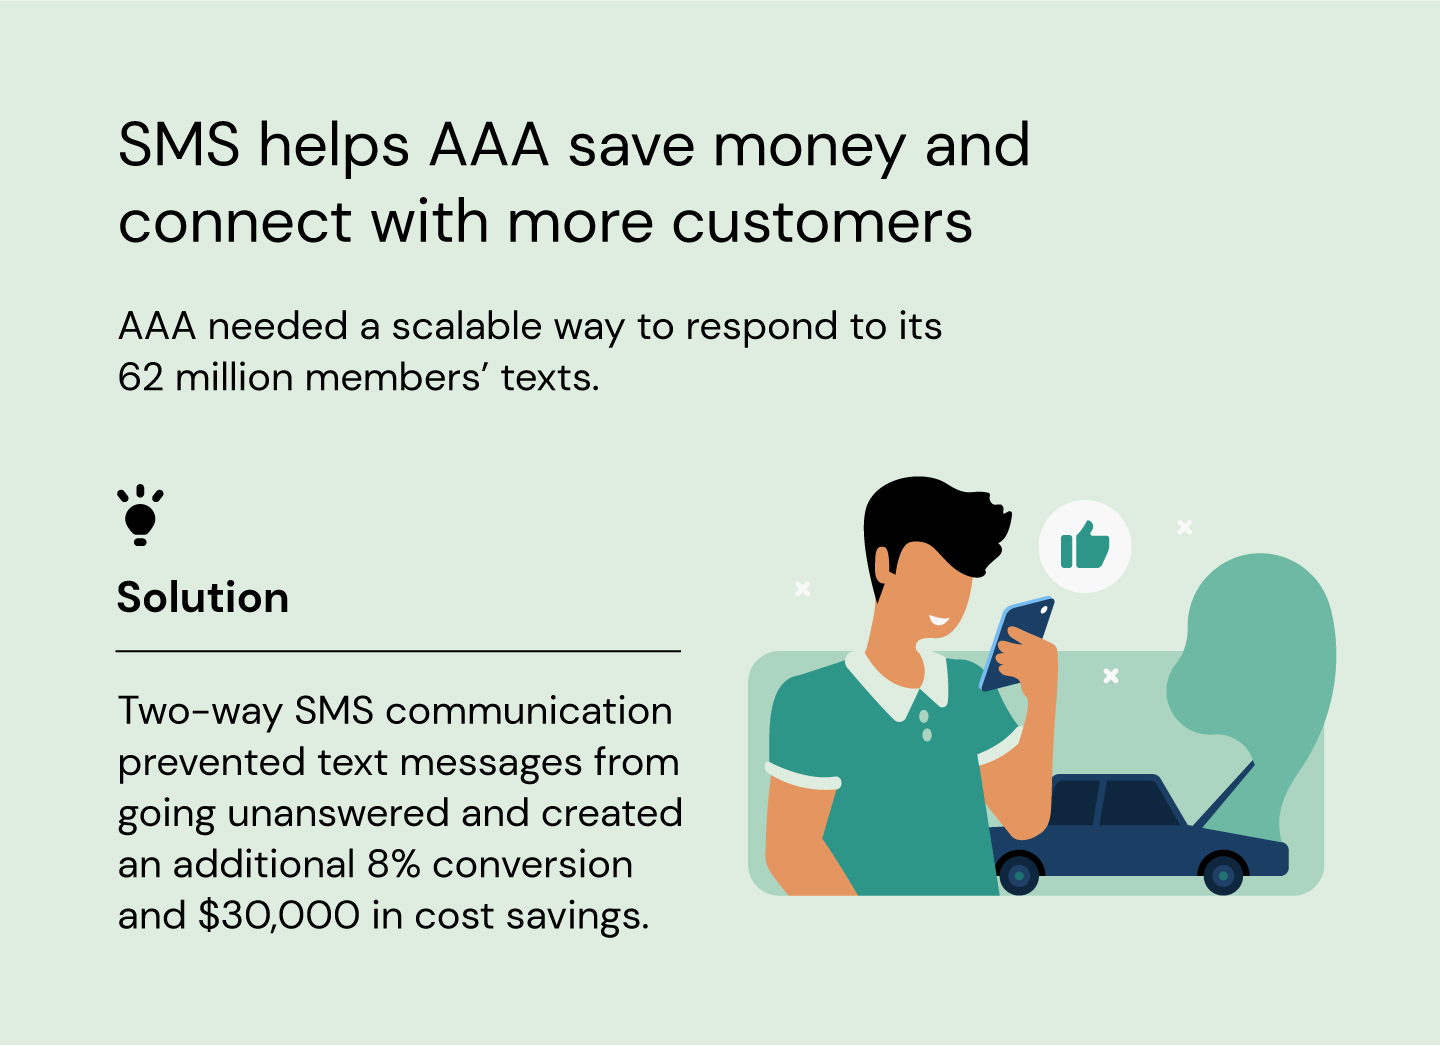 How SMS helps AAA engage customers and save money.